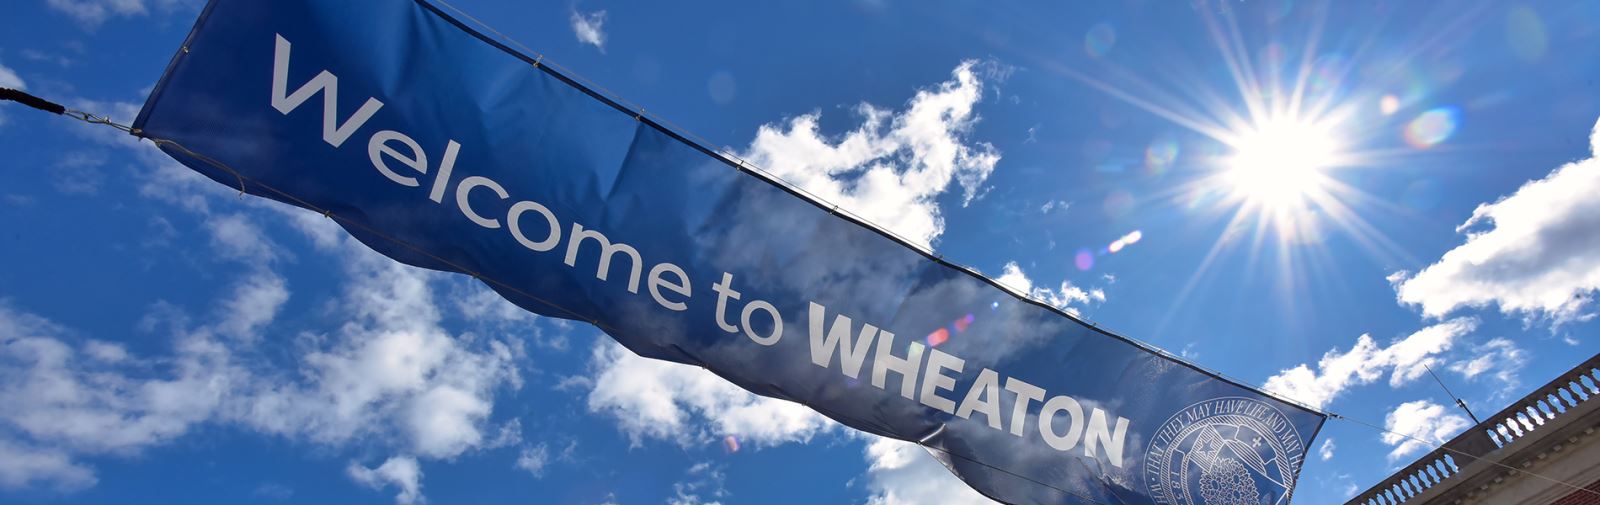 Banner that reads, "Welcome to Wheaton" across a blue sky with clouds